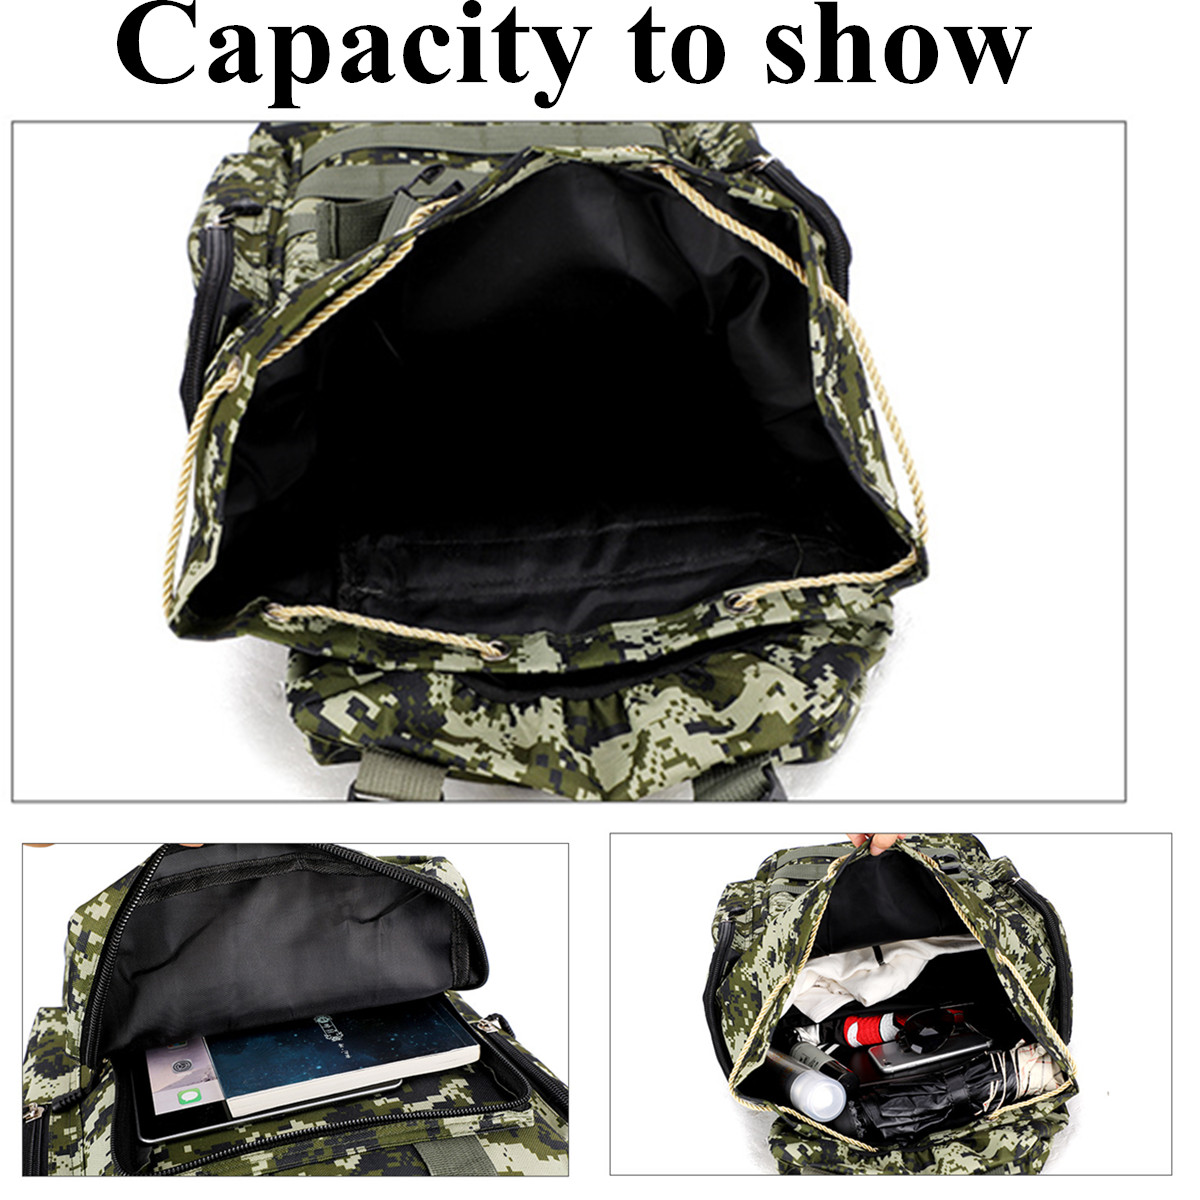 80L-Multi-Color-Large-Capacity-Waterproof-Tactical-Backpack-Outdoor-Travel-Hiking-Camping-Bag-1650714-6